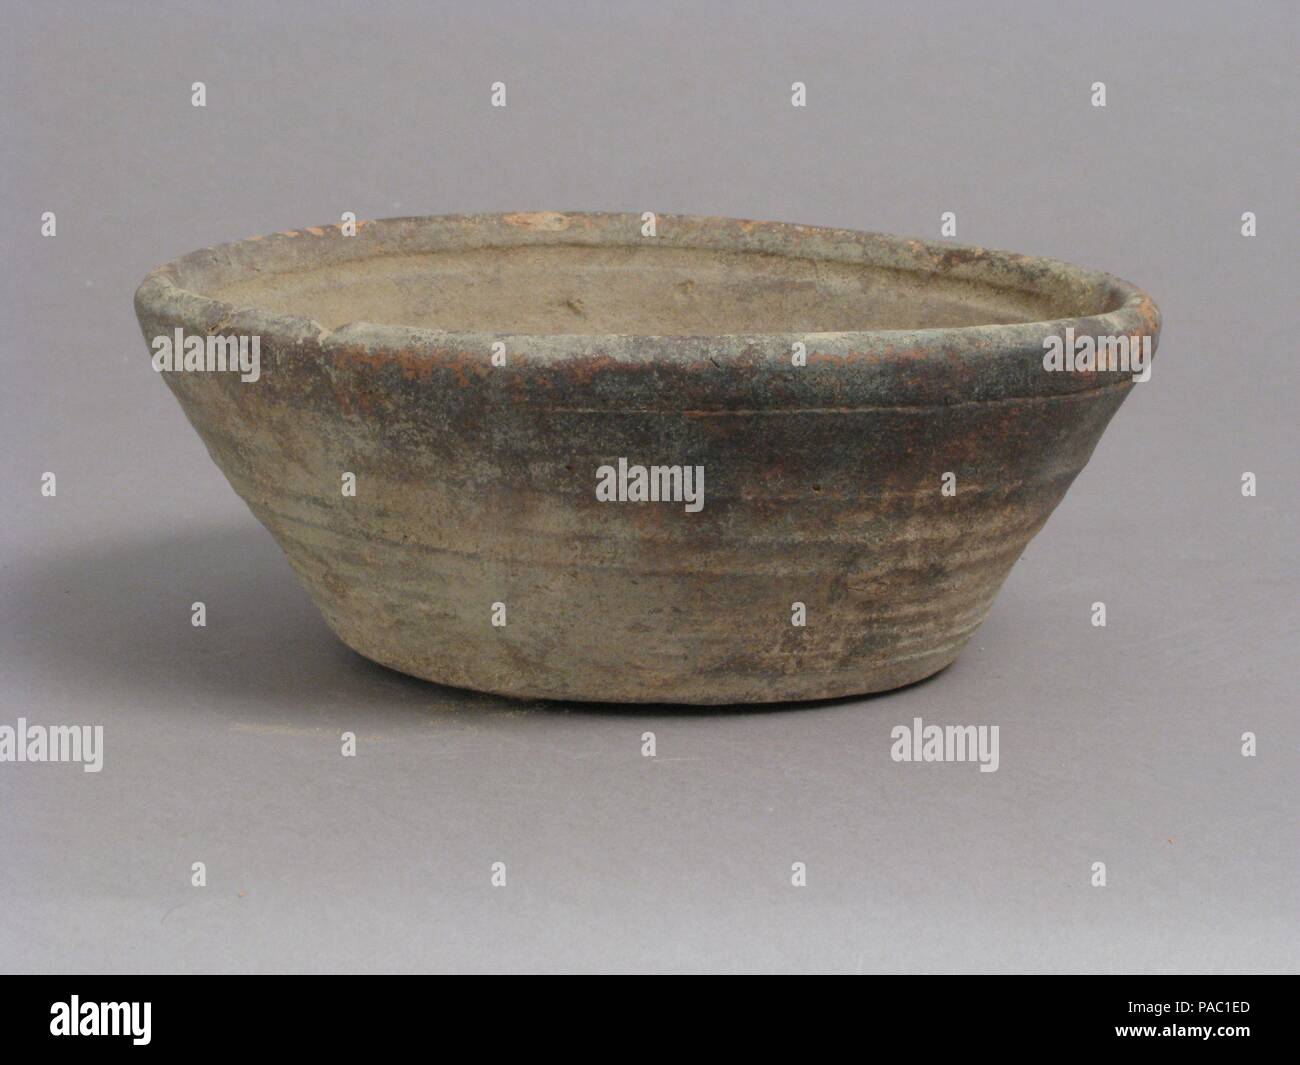 Bowl. Culture: Coptic. Dimensions: Overall: 2 1/2 x 5 7/8 in. (6.3 x 14.9 cm). Date: 4th-7th century. Museum: Metropolitan Museum of Art, New York, USA. Stock Photo